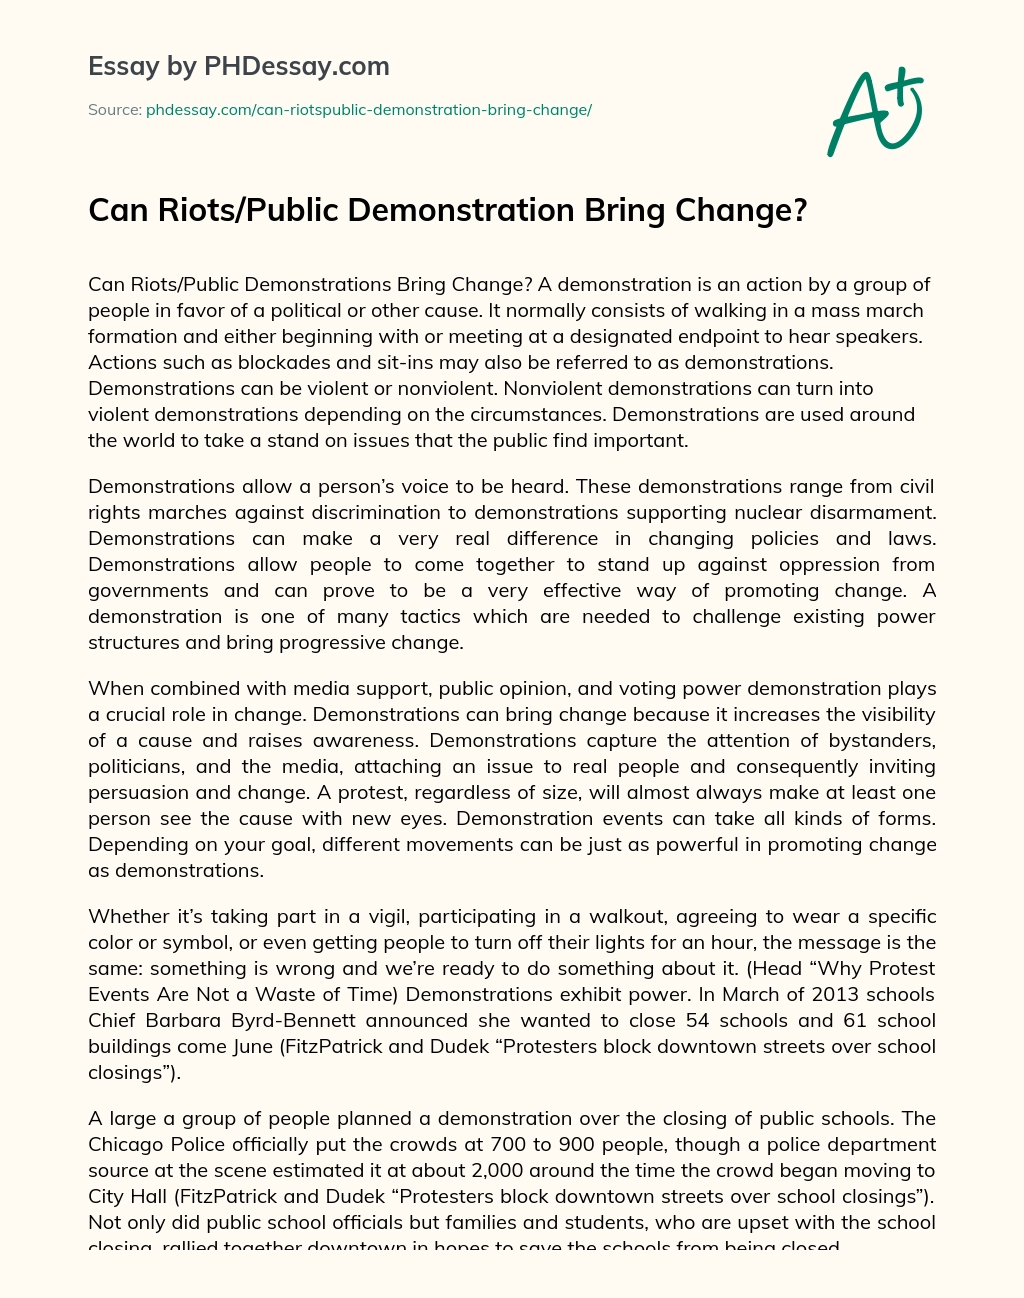 Can Riots/Public Demonstration Bring Change? essay